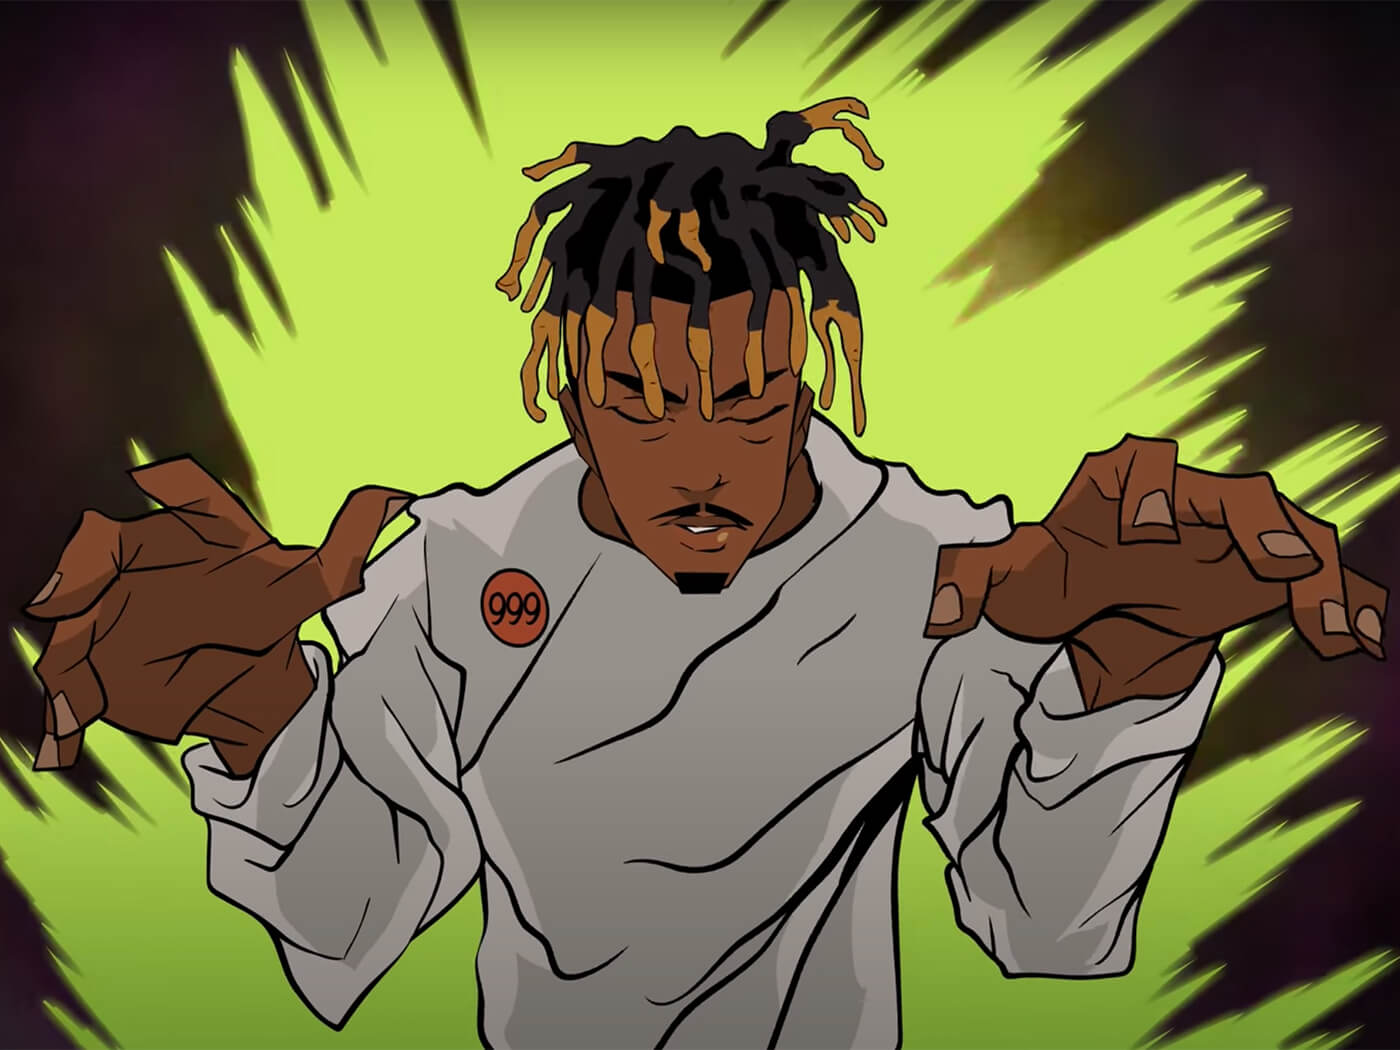 Listen to a new posthumous Juice WRLD track, "Righteous" .